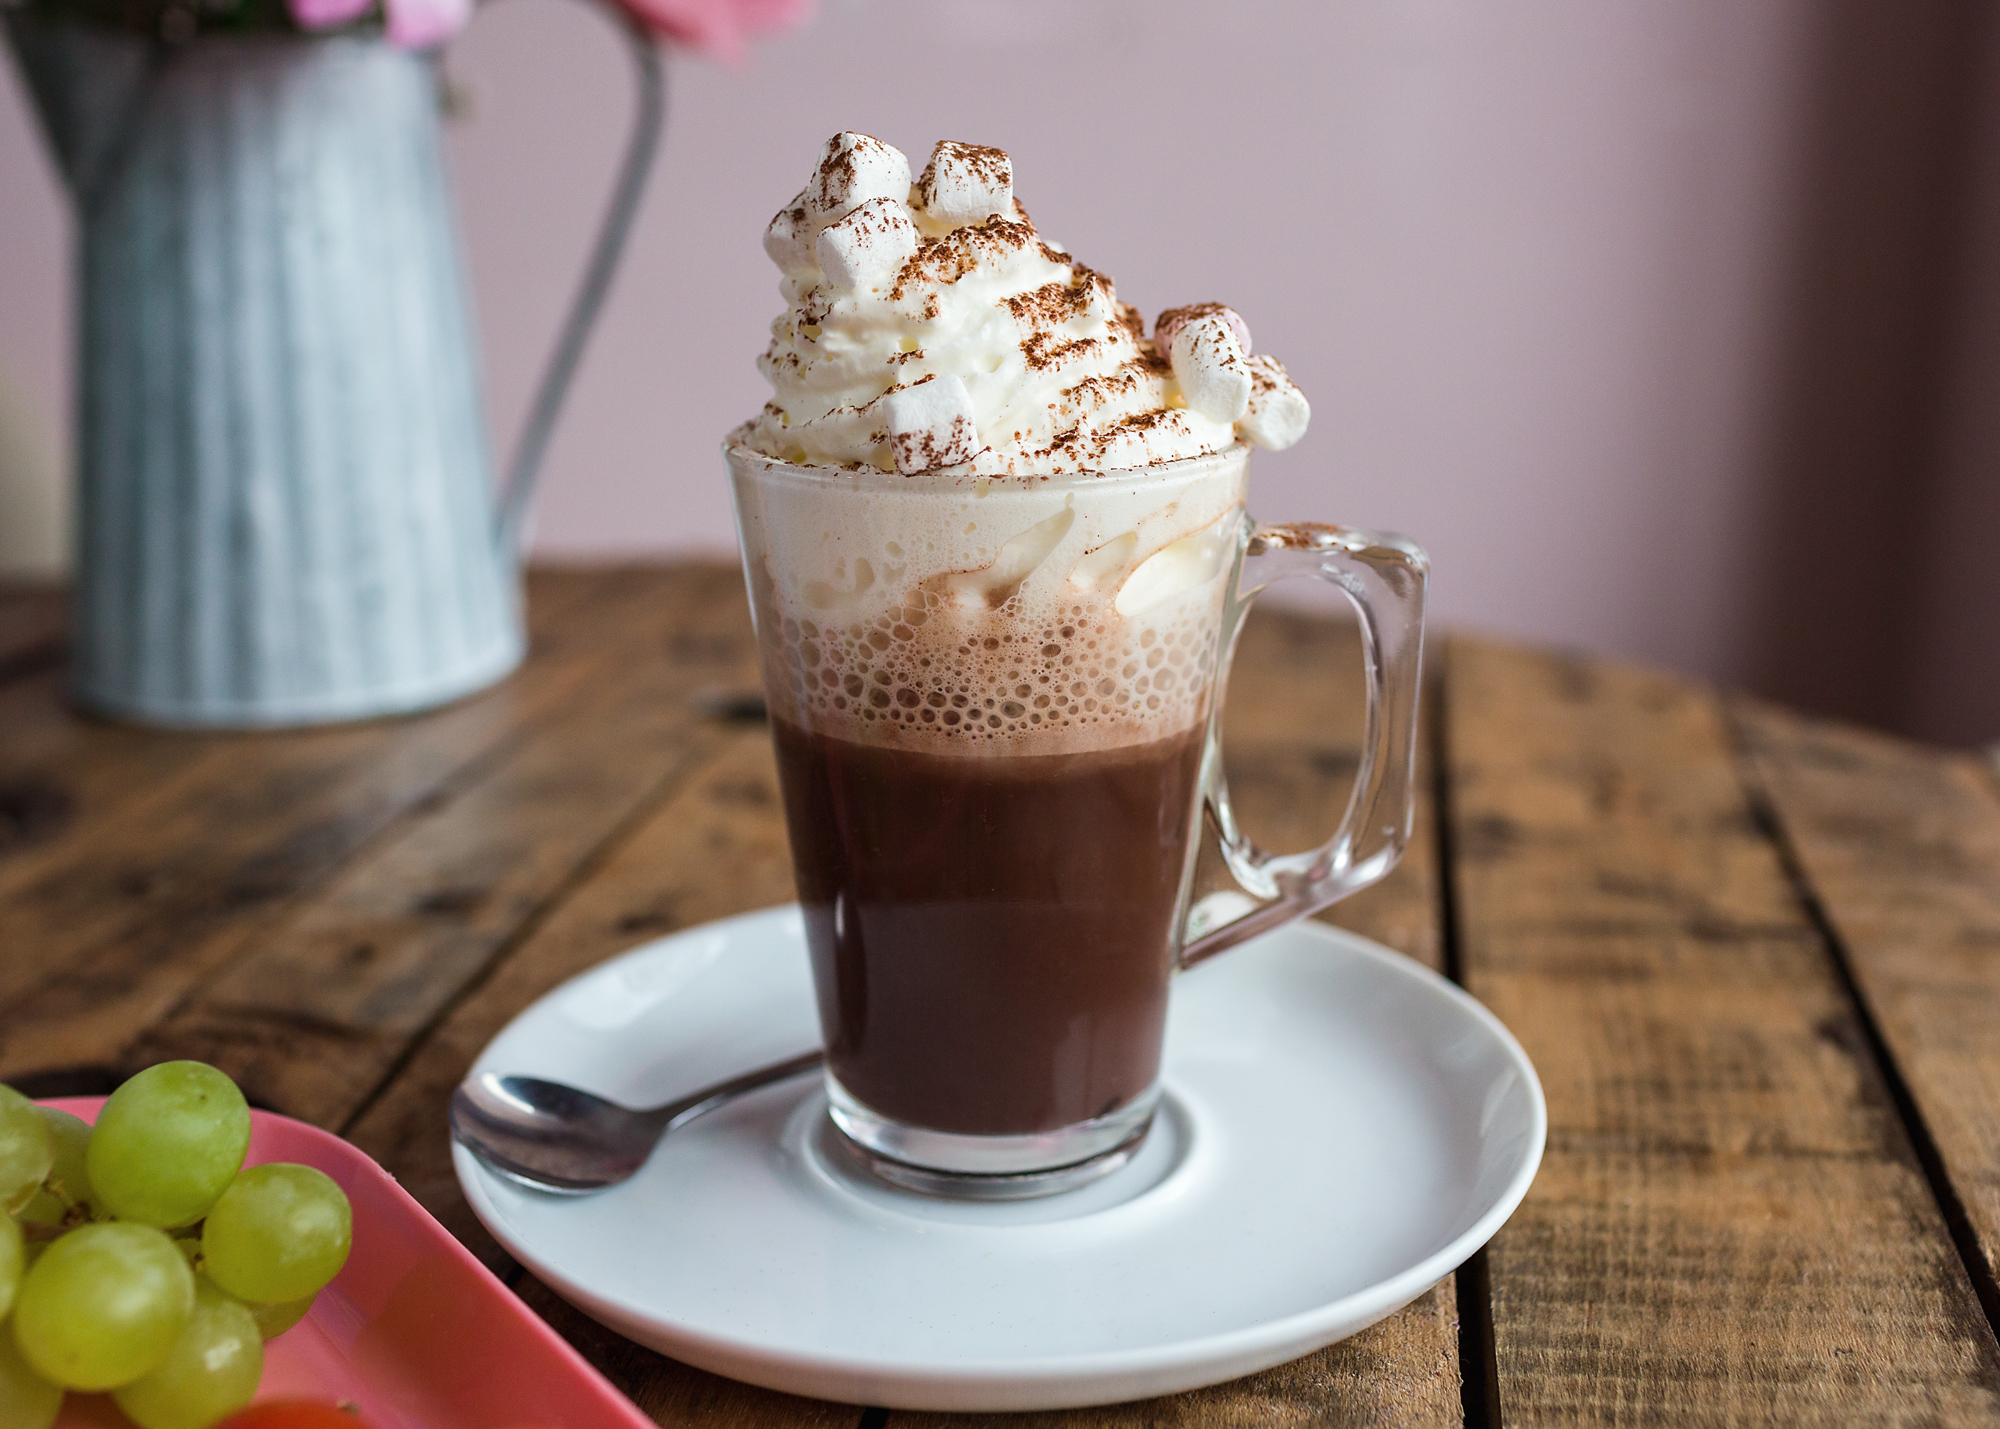 Hot chocolate at Miss B's cafe, Bedwas